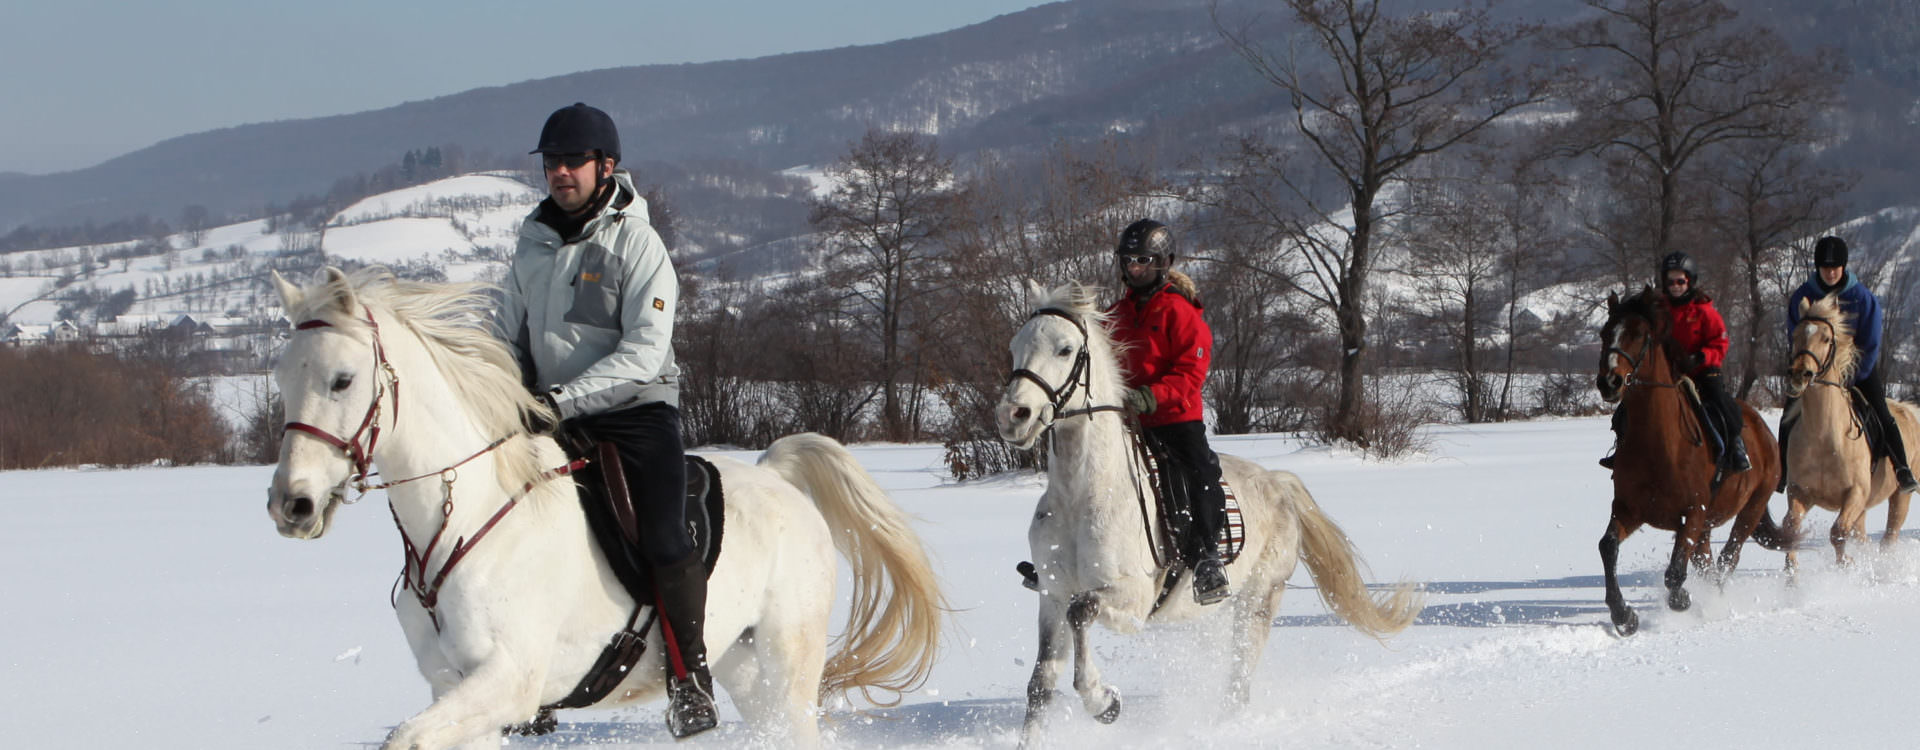 Riding in the snow in the Carpathian Mountains, Romania